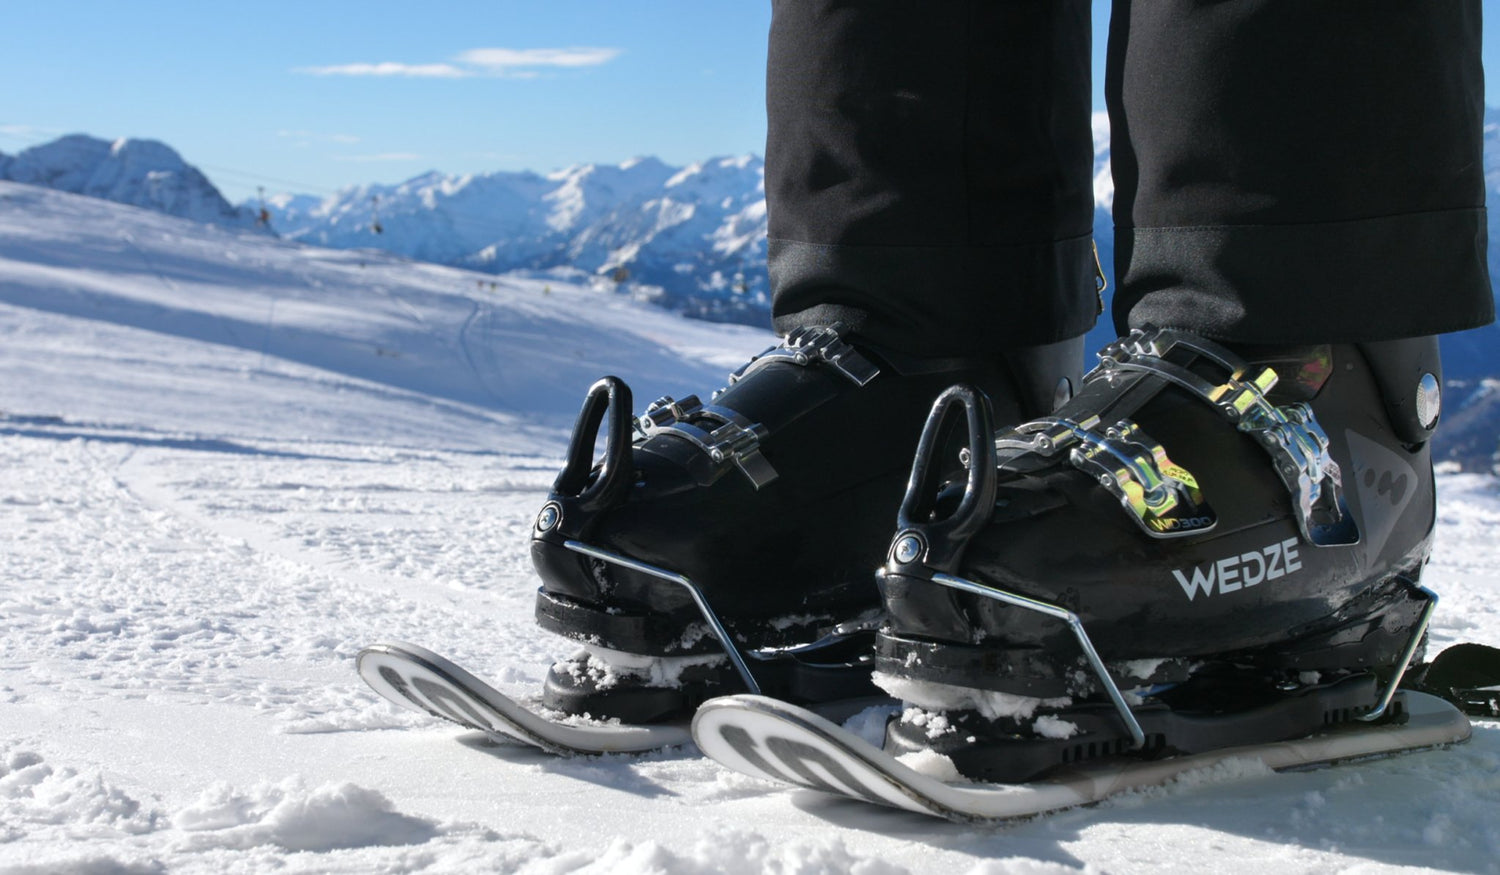 Bindings for Short Skis - All You Need to Know - snowfeet*